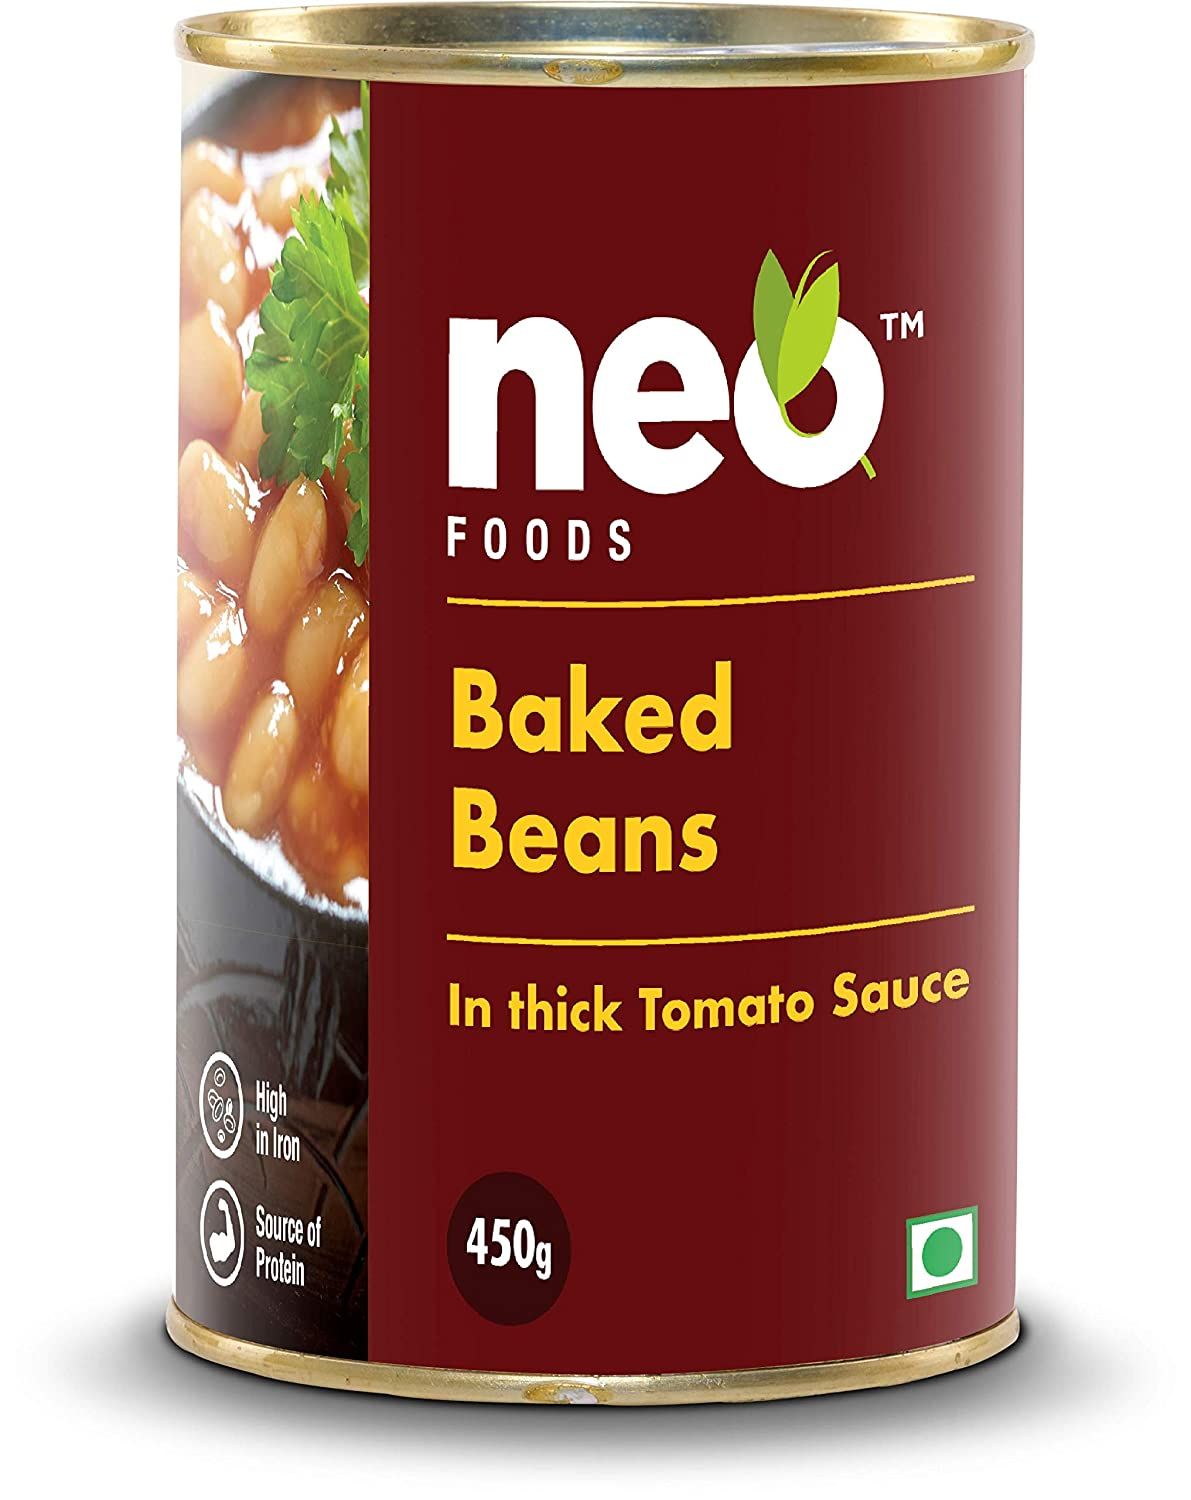 Neo Baked Beans in Tomato Sauce Image